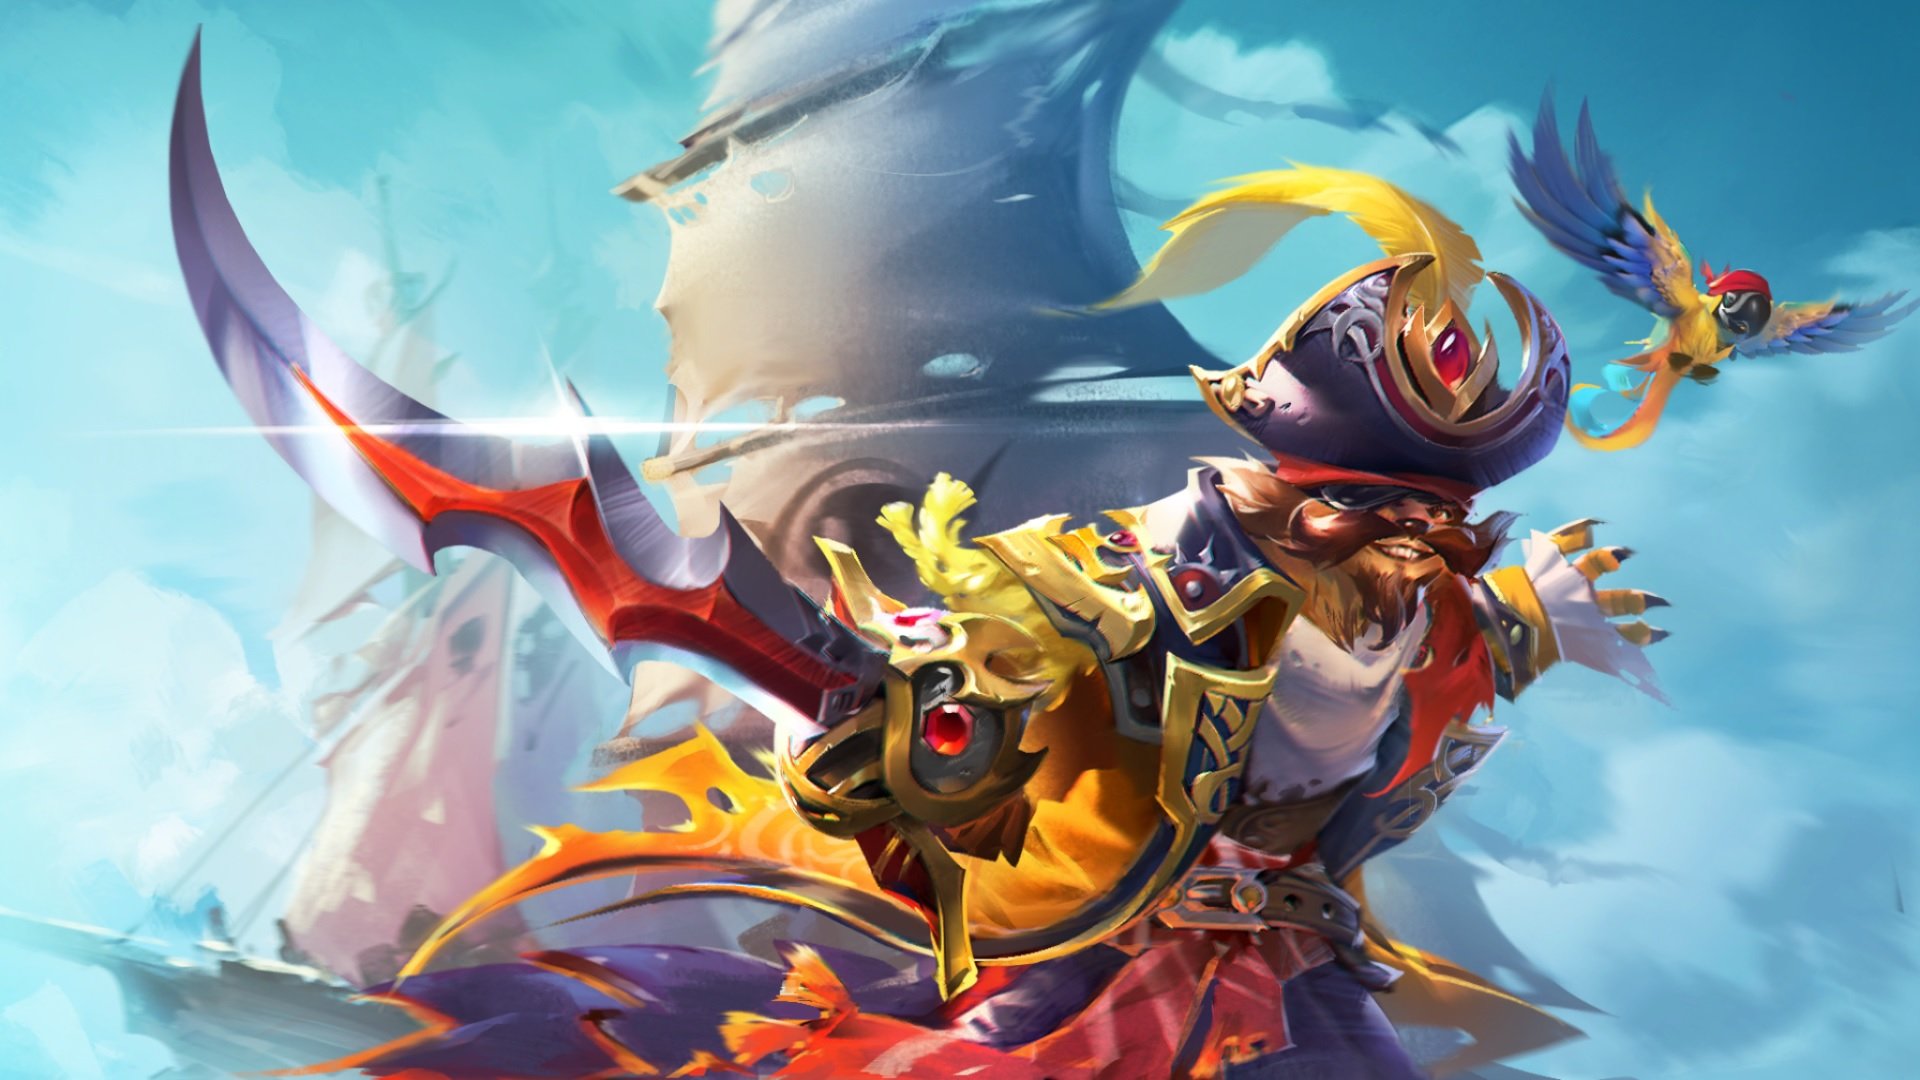 Pangolier, from Dota 2, dressed like a pirate holding a sword with a parrot flying in the background.